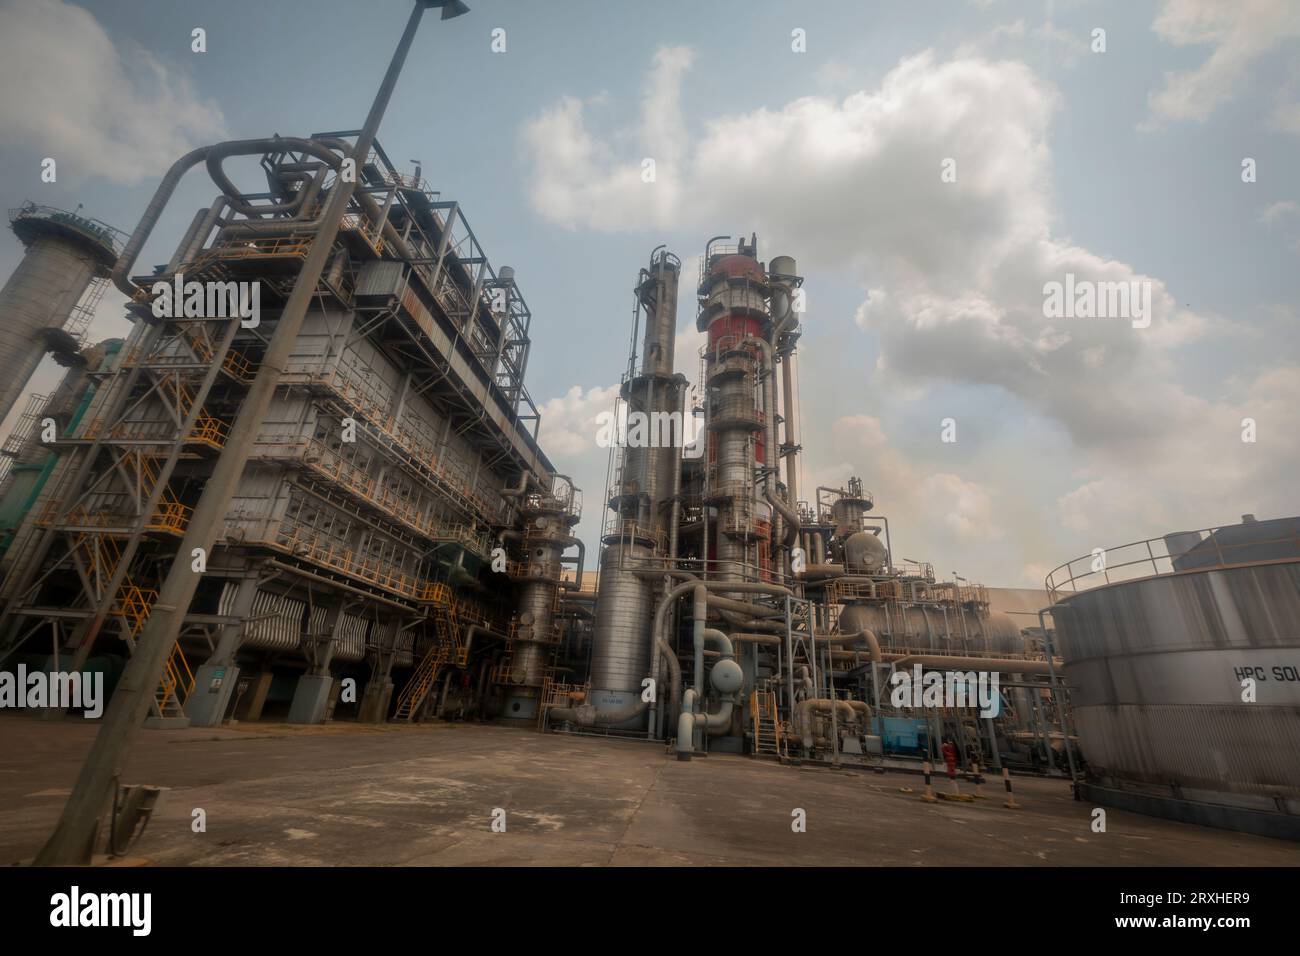 KAFCO fertilizer plant in Chittagong. Bangladesh has put export restrictions on fertilizer as a result of the Russia-Ukraine conflict. Stock Photo